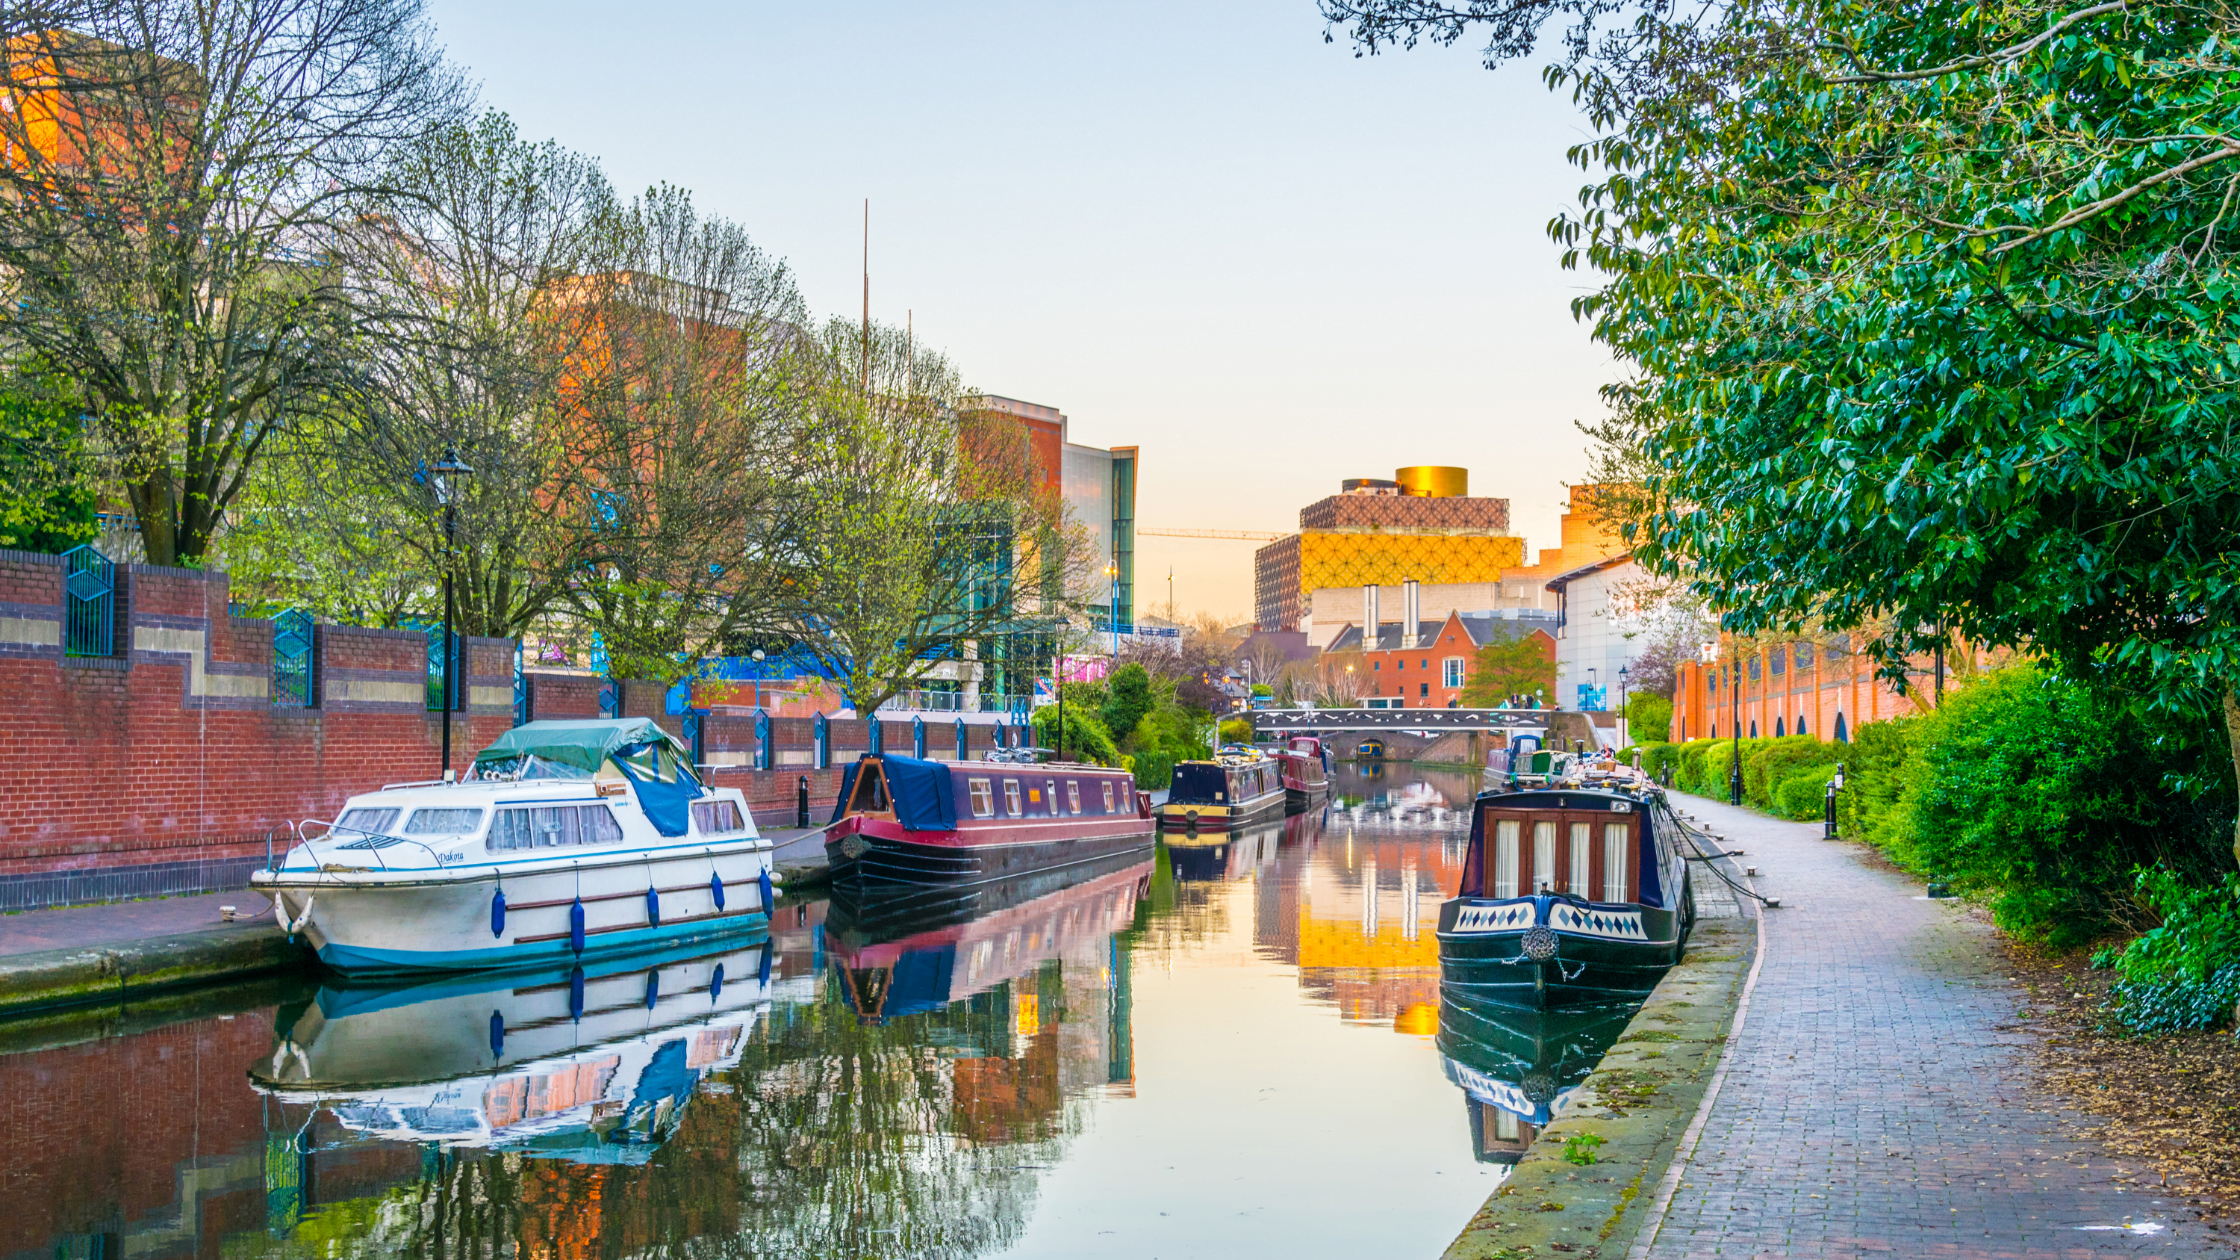 Sunset view of brick buildings and canal water channel in Birmingham